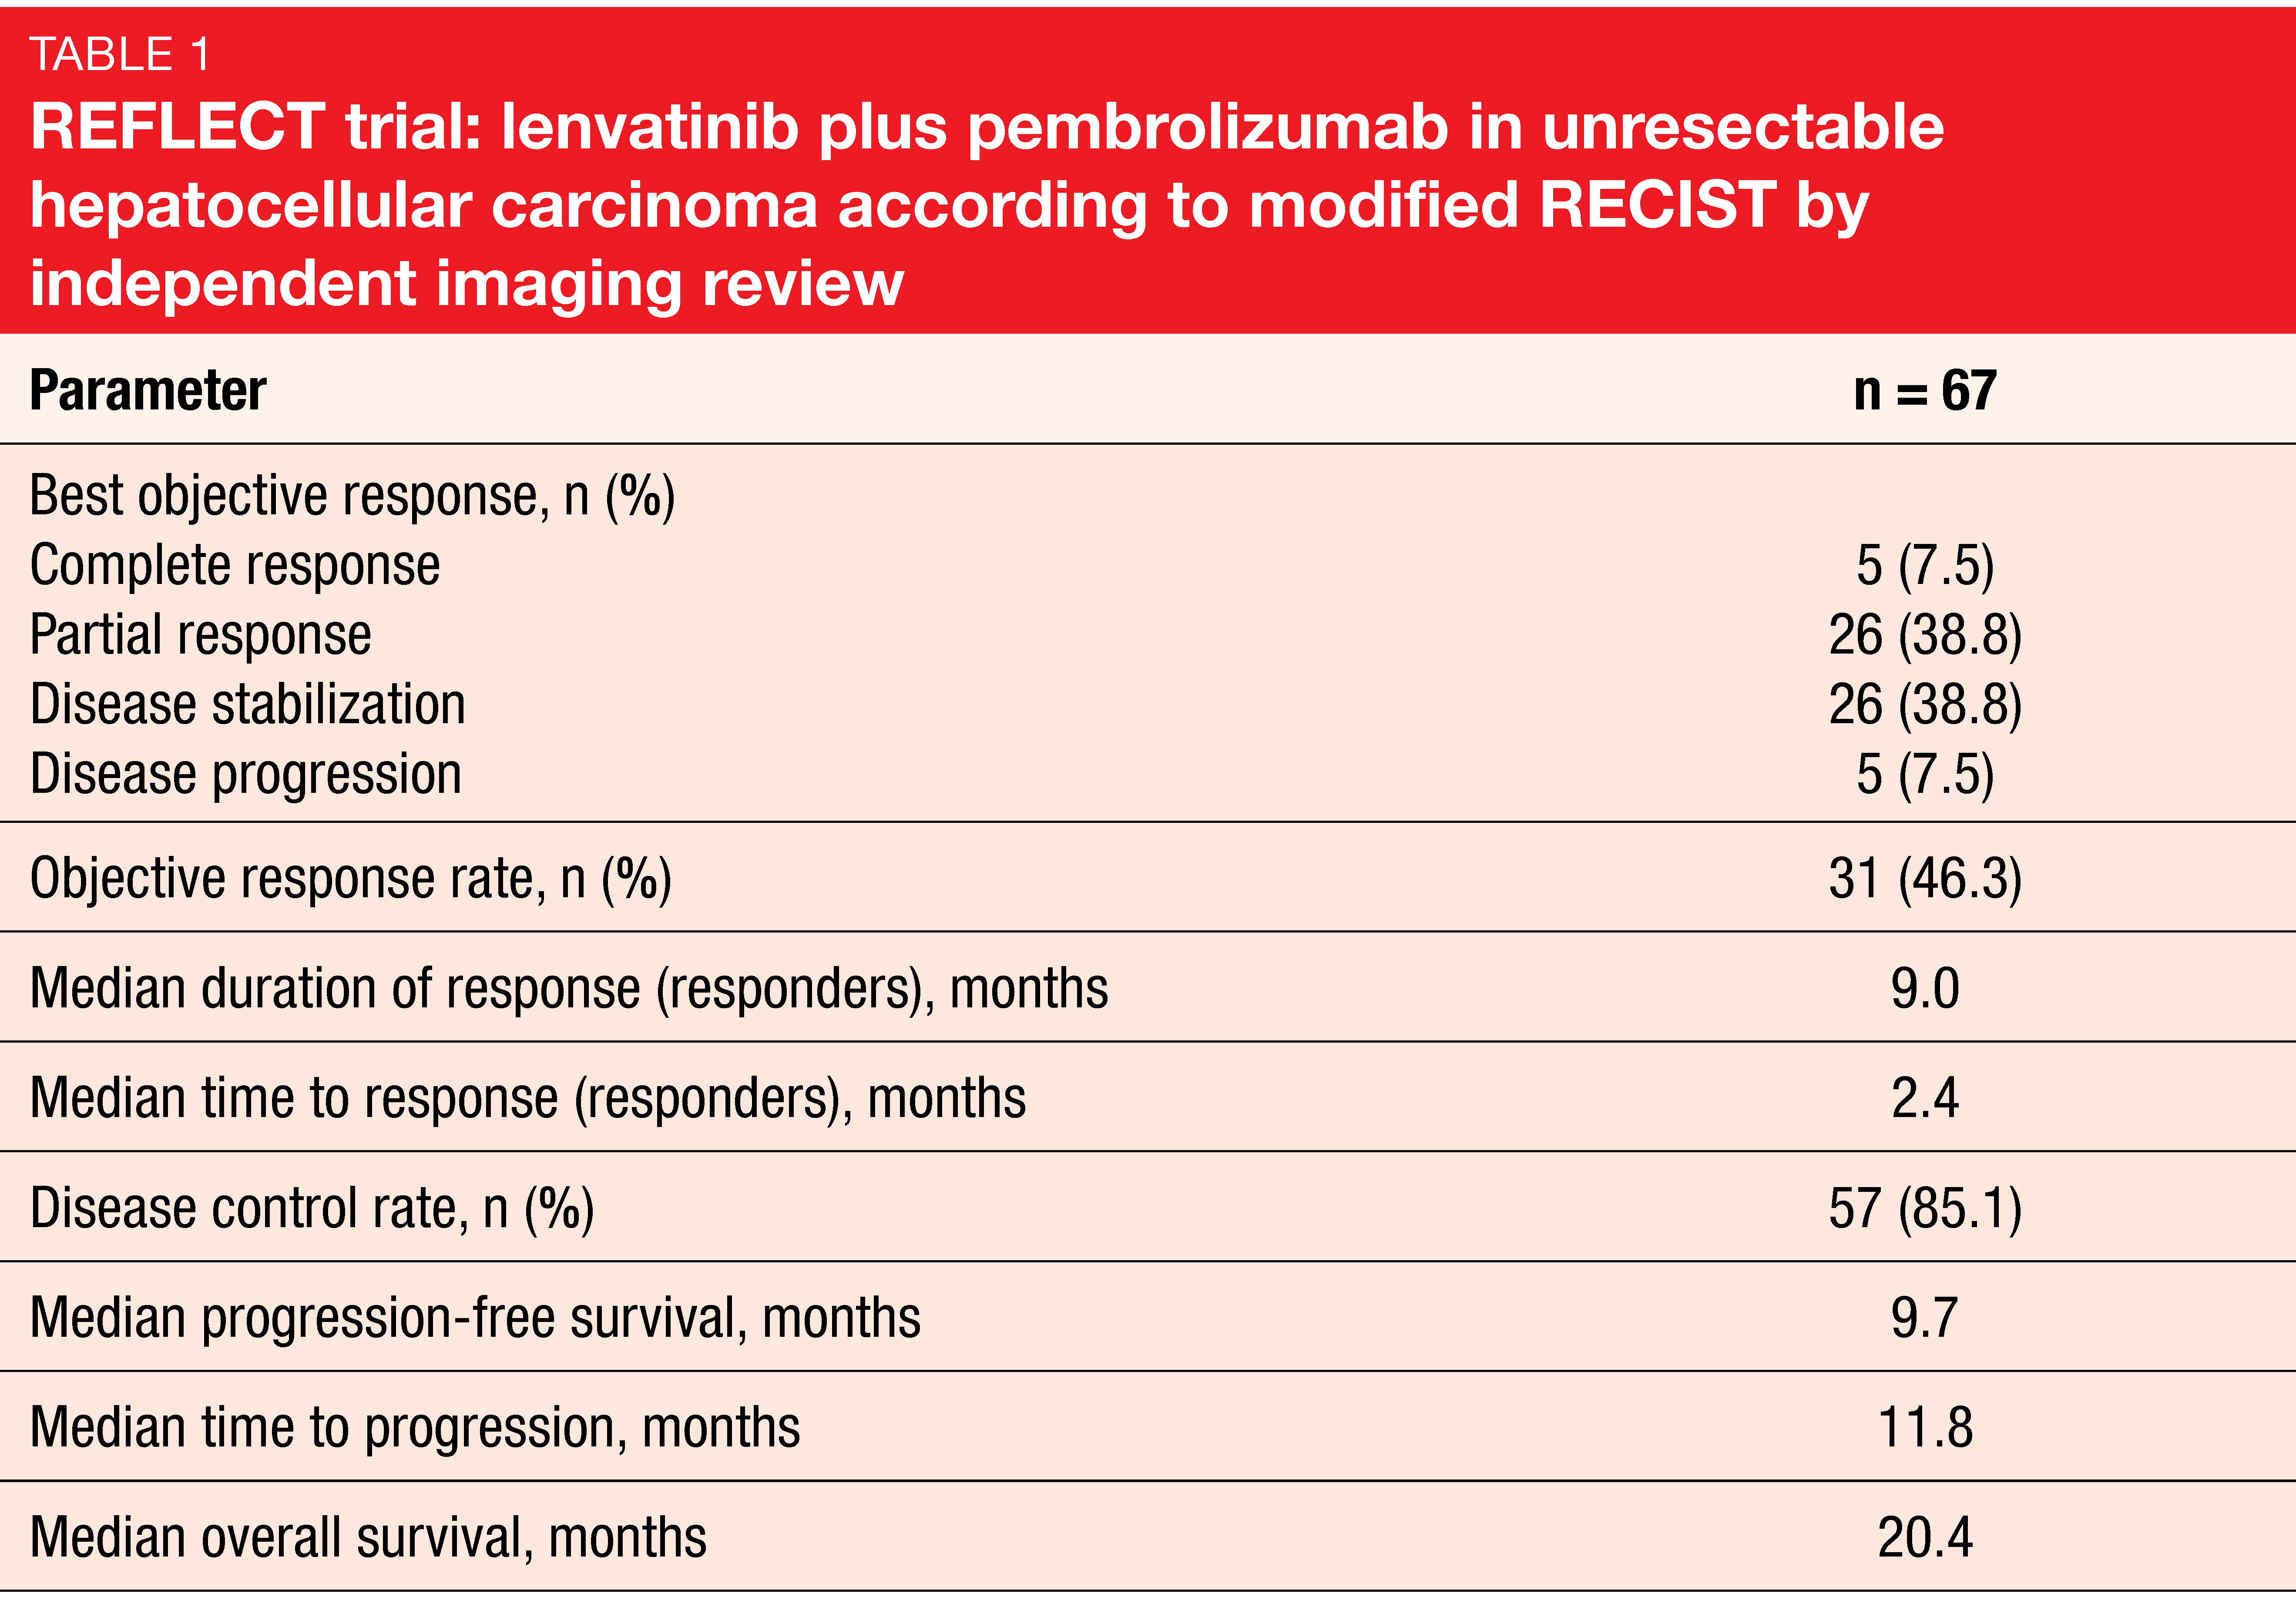 REFLECT trial: lenvatinib plus pembrolizumab in unresectable hepatocellular carcinoma according to modified RECIST by independent imaging review